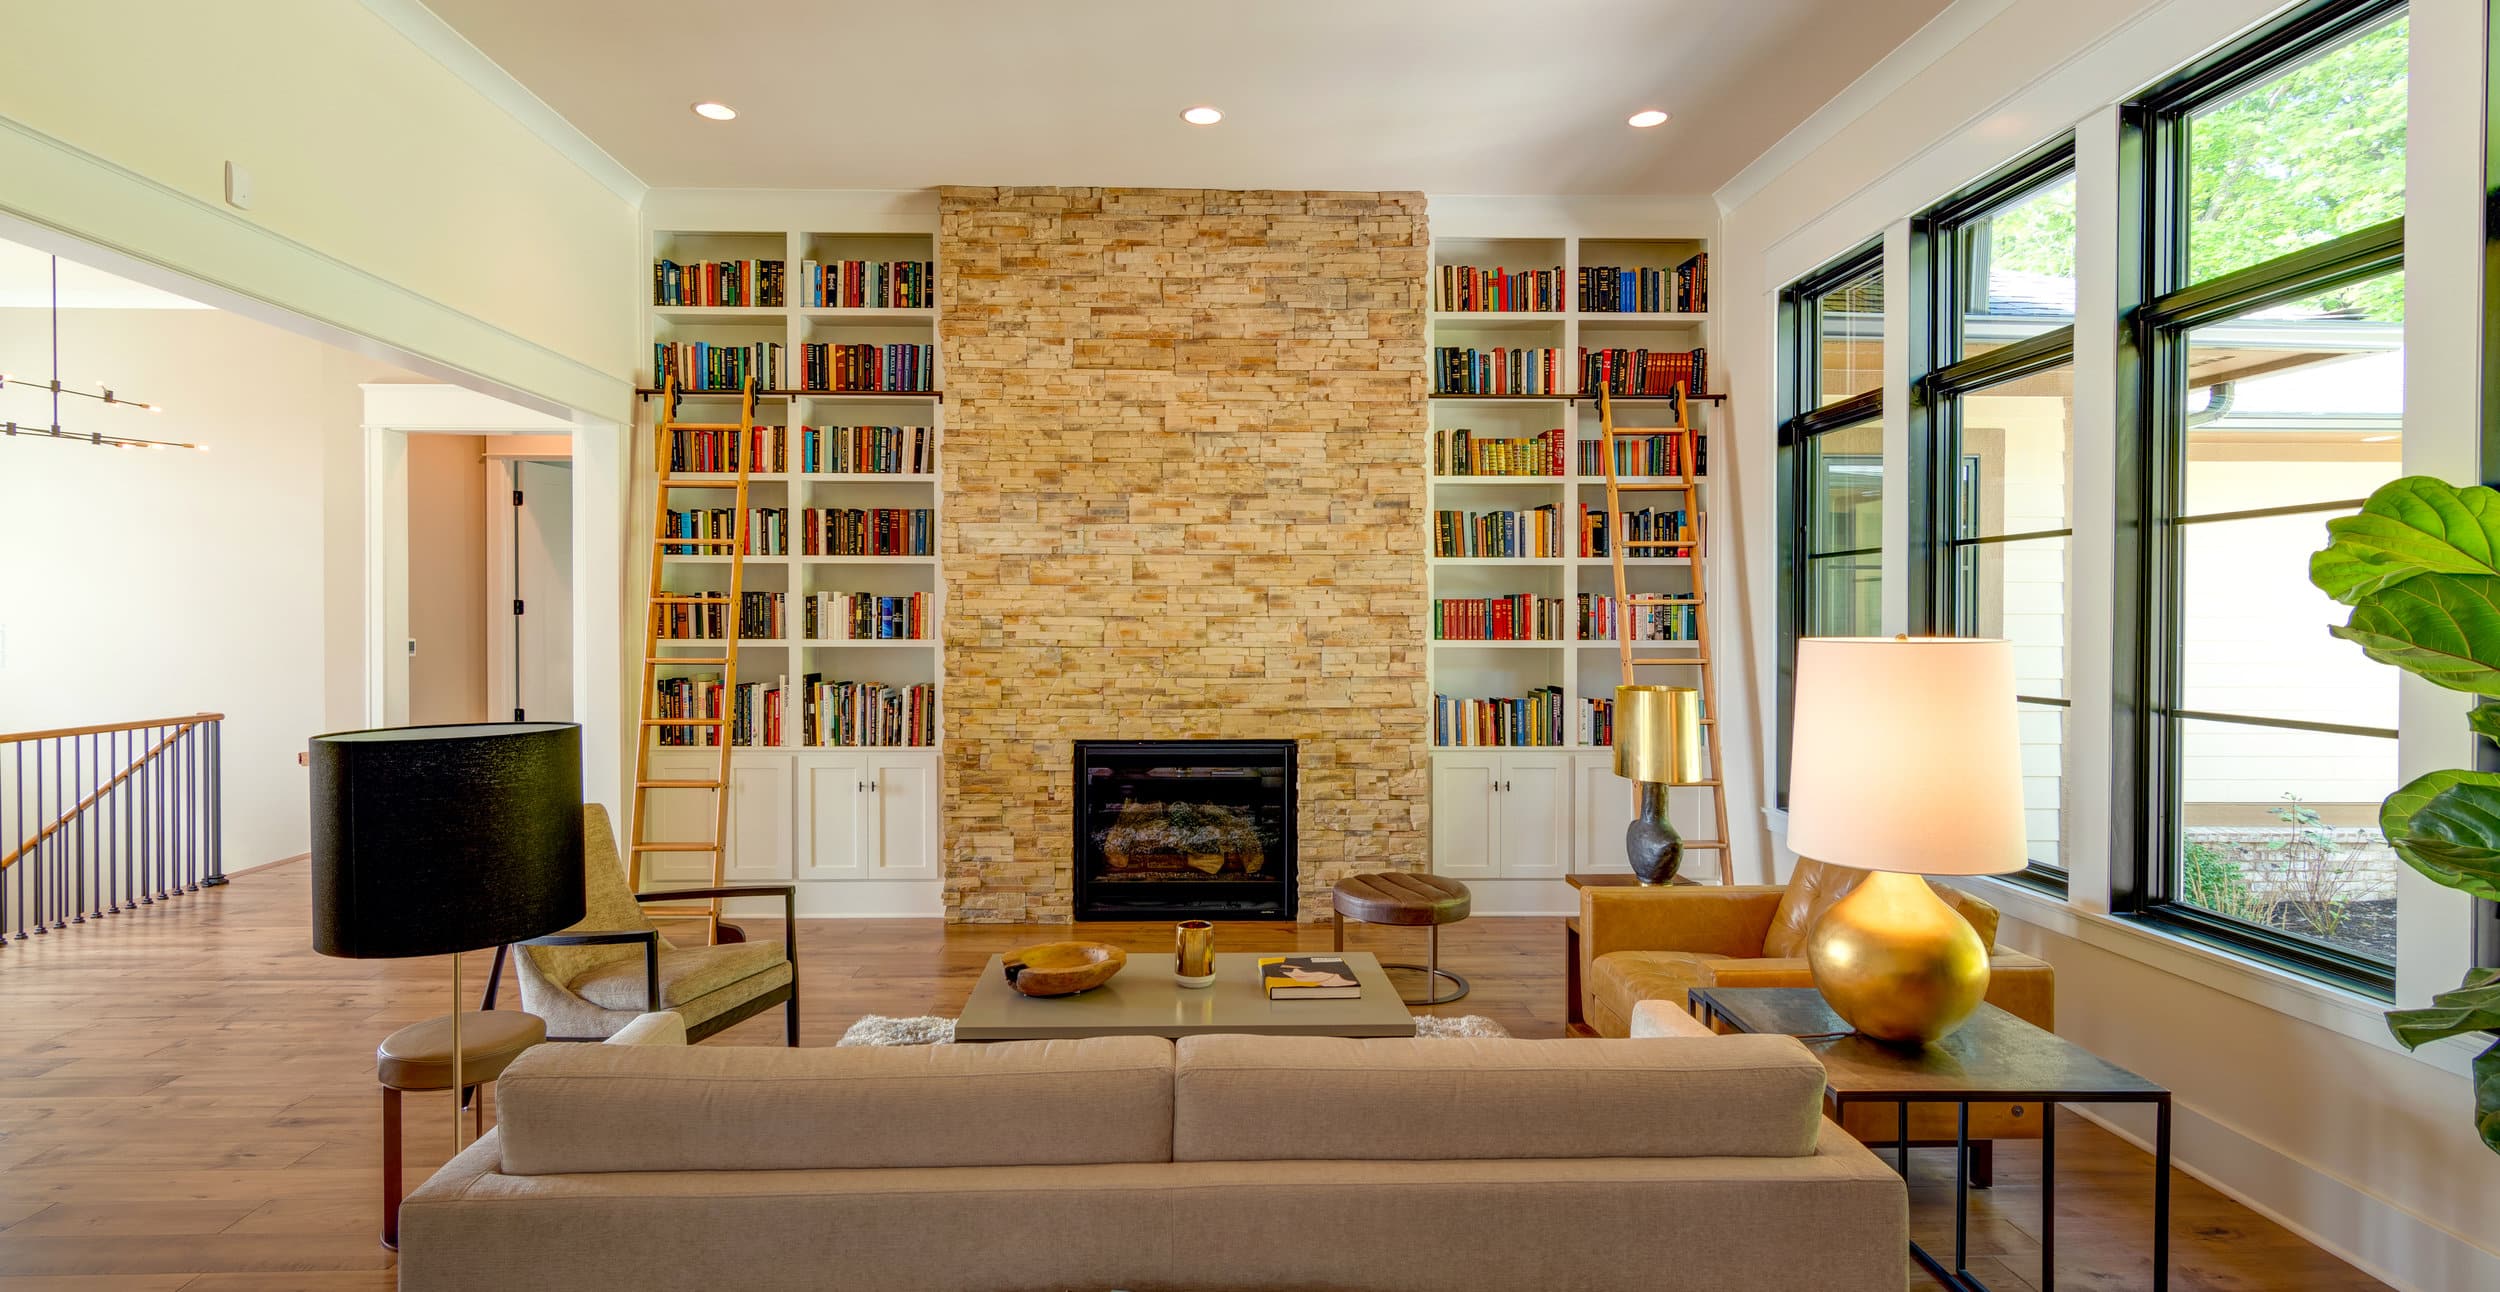 A living room with a fireplace and bookshelves in a custom home builder in Fishers, Indiana.